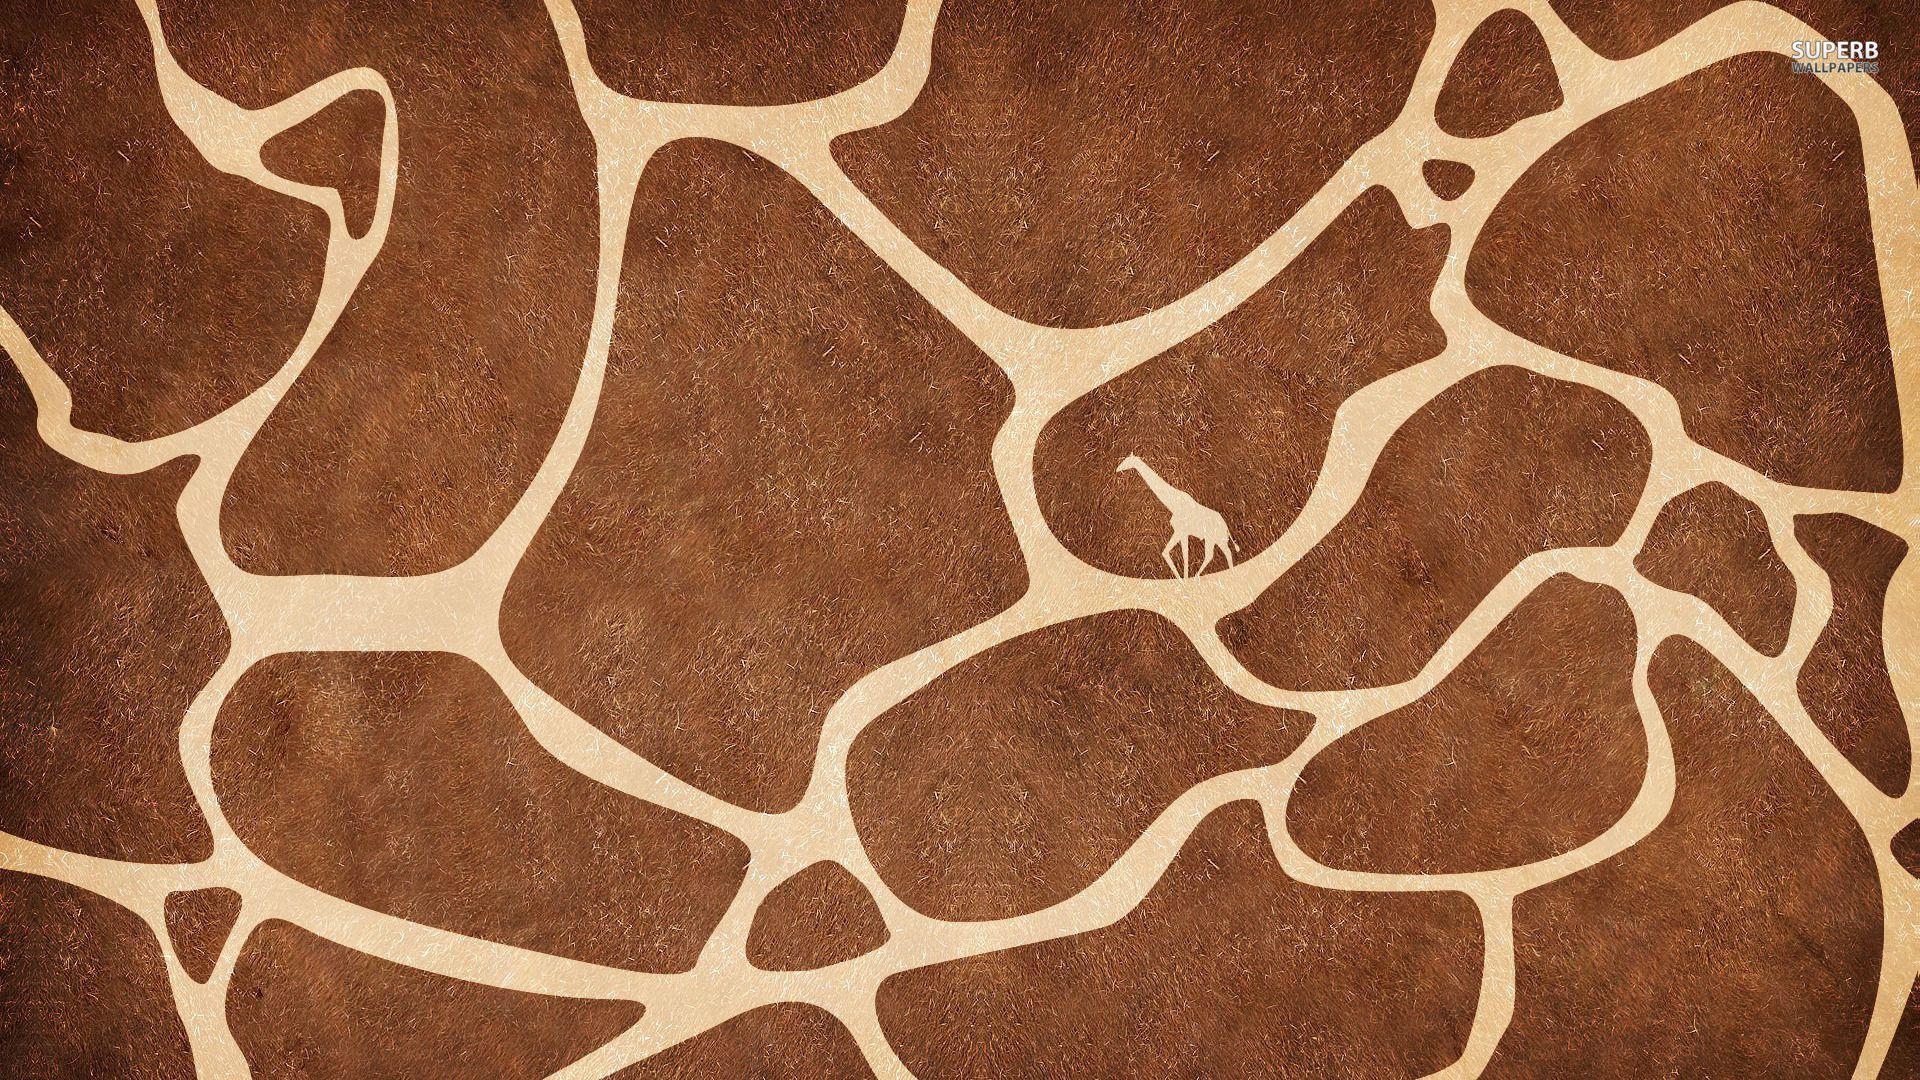 Giraffe Print Background Images HD Pictures and Wallpaper For Free  Download  Pngtree